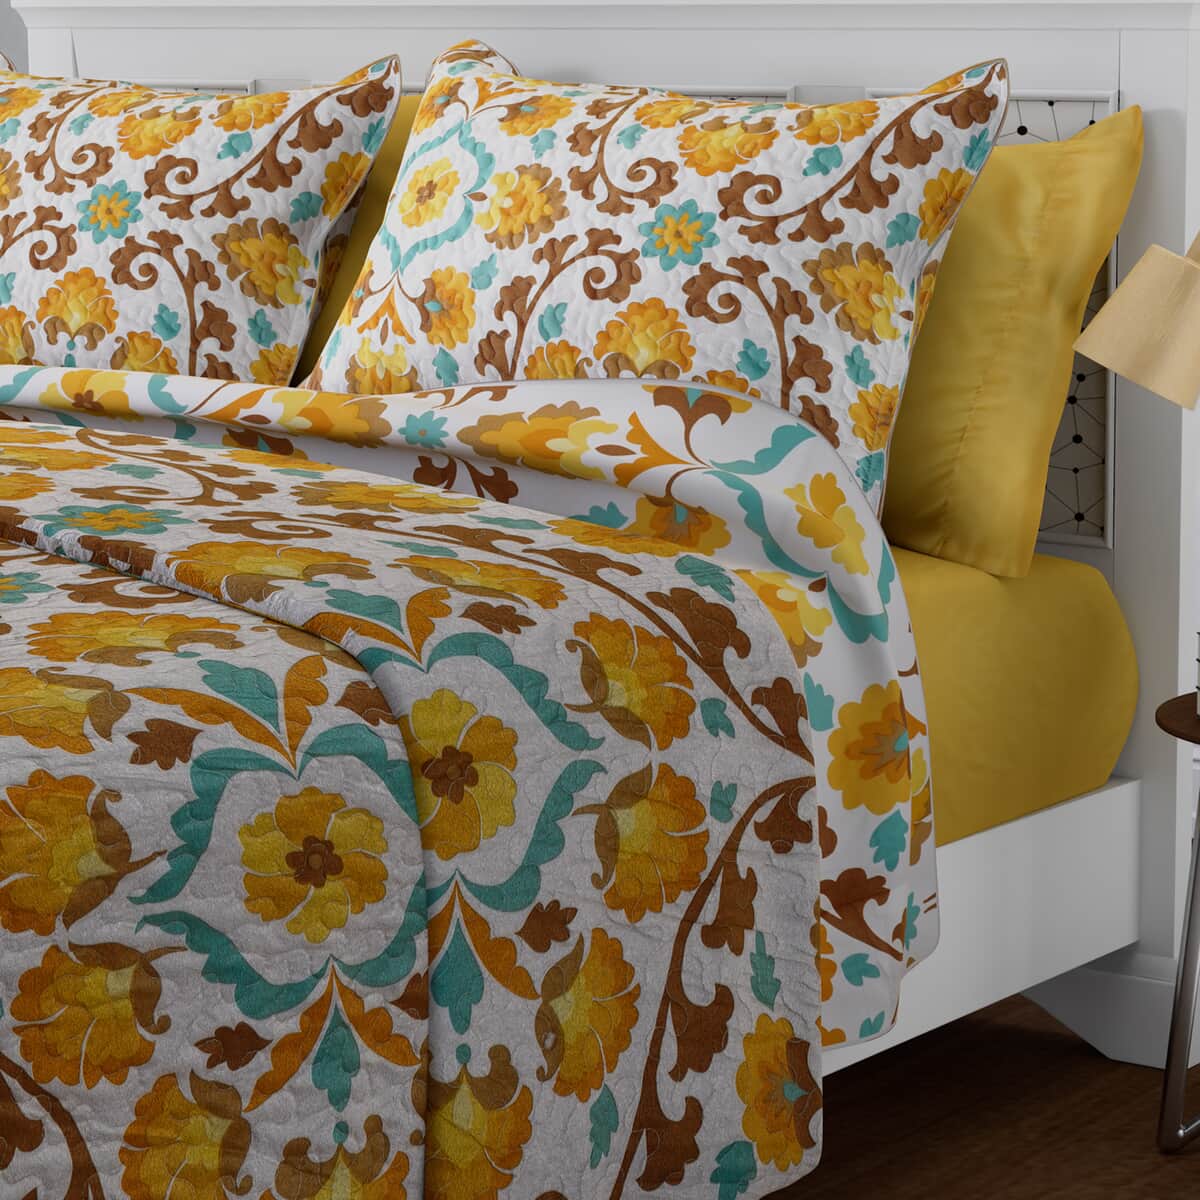 HOMESMART Yellow Floral Print 7pc Quilt and Sheet Set - Queen (100% Microfiber) image number 2